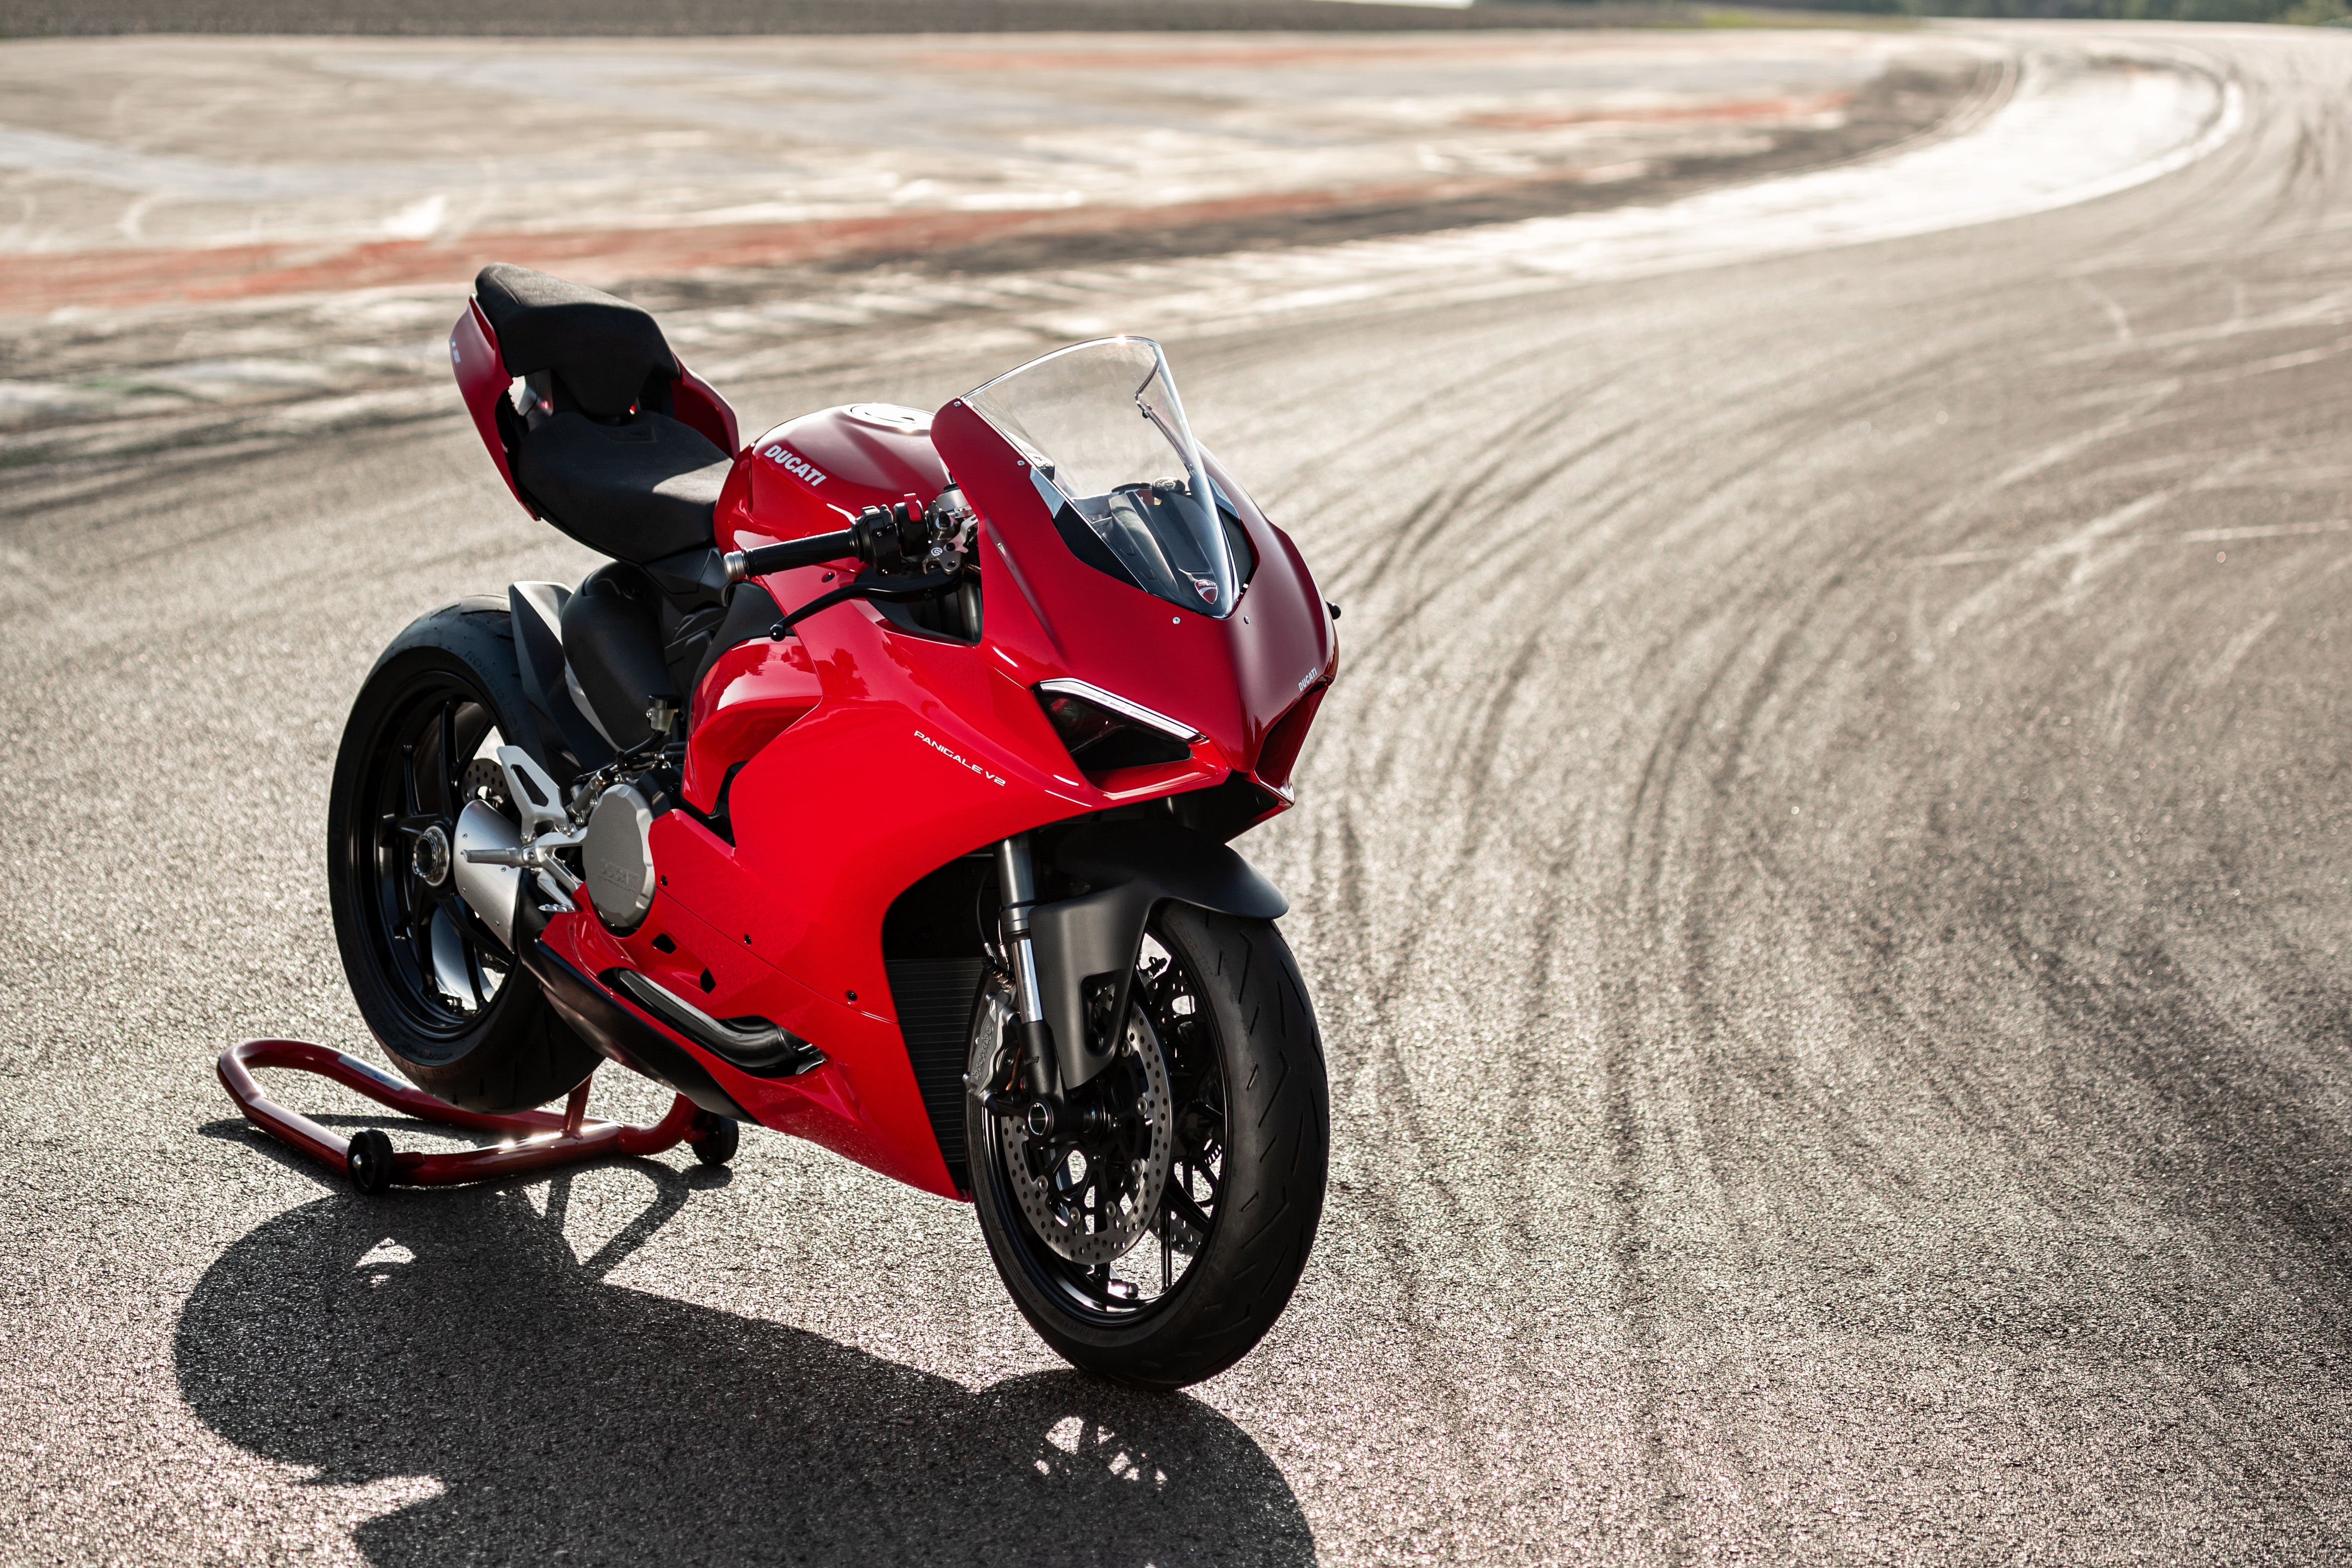 Ducati Panigale V2 Image Gallery